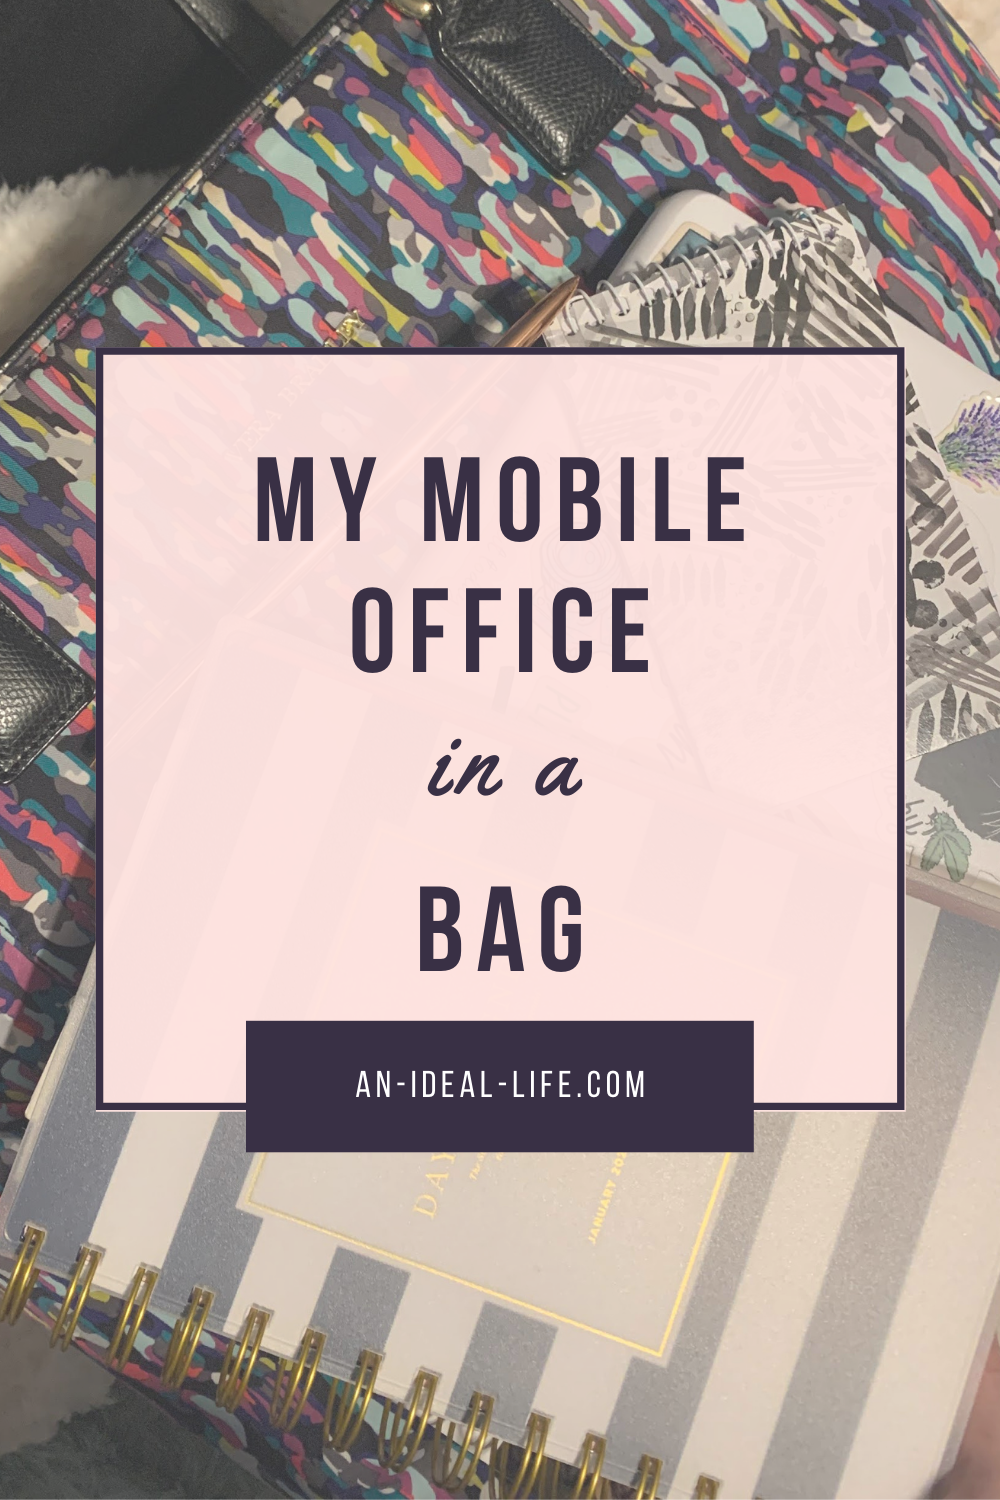 My Mobile Office in a Bag